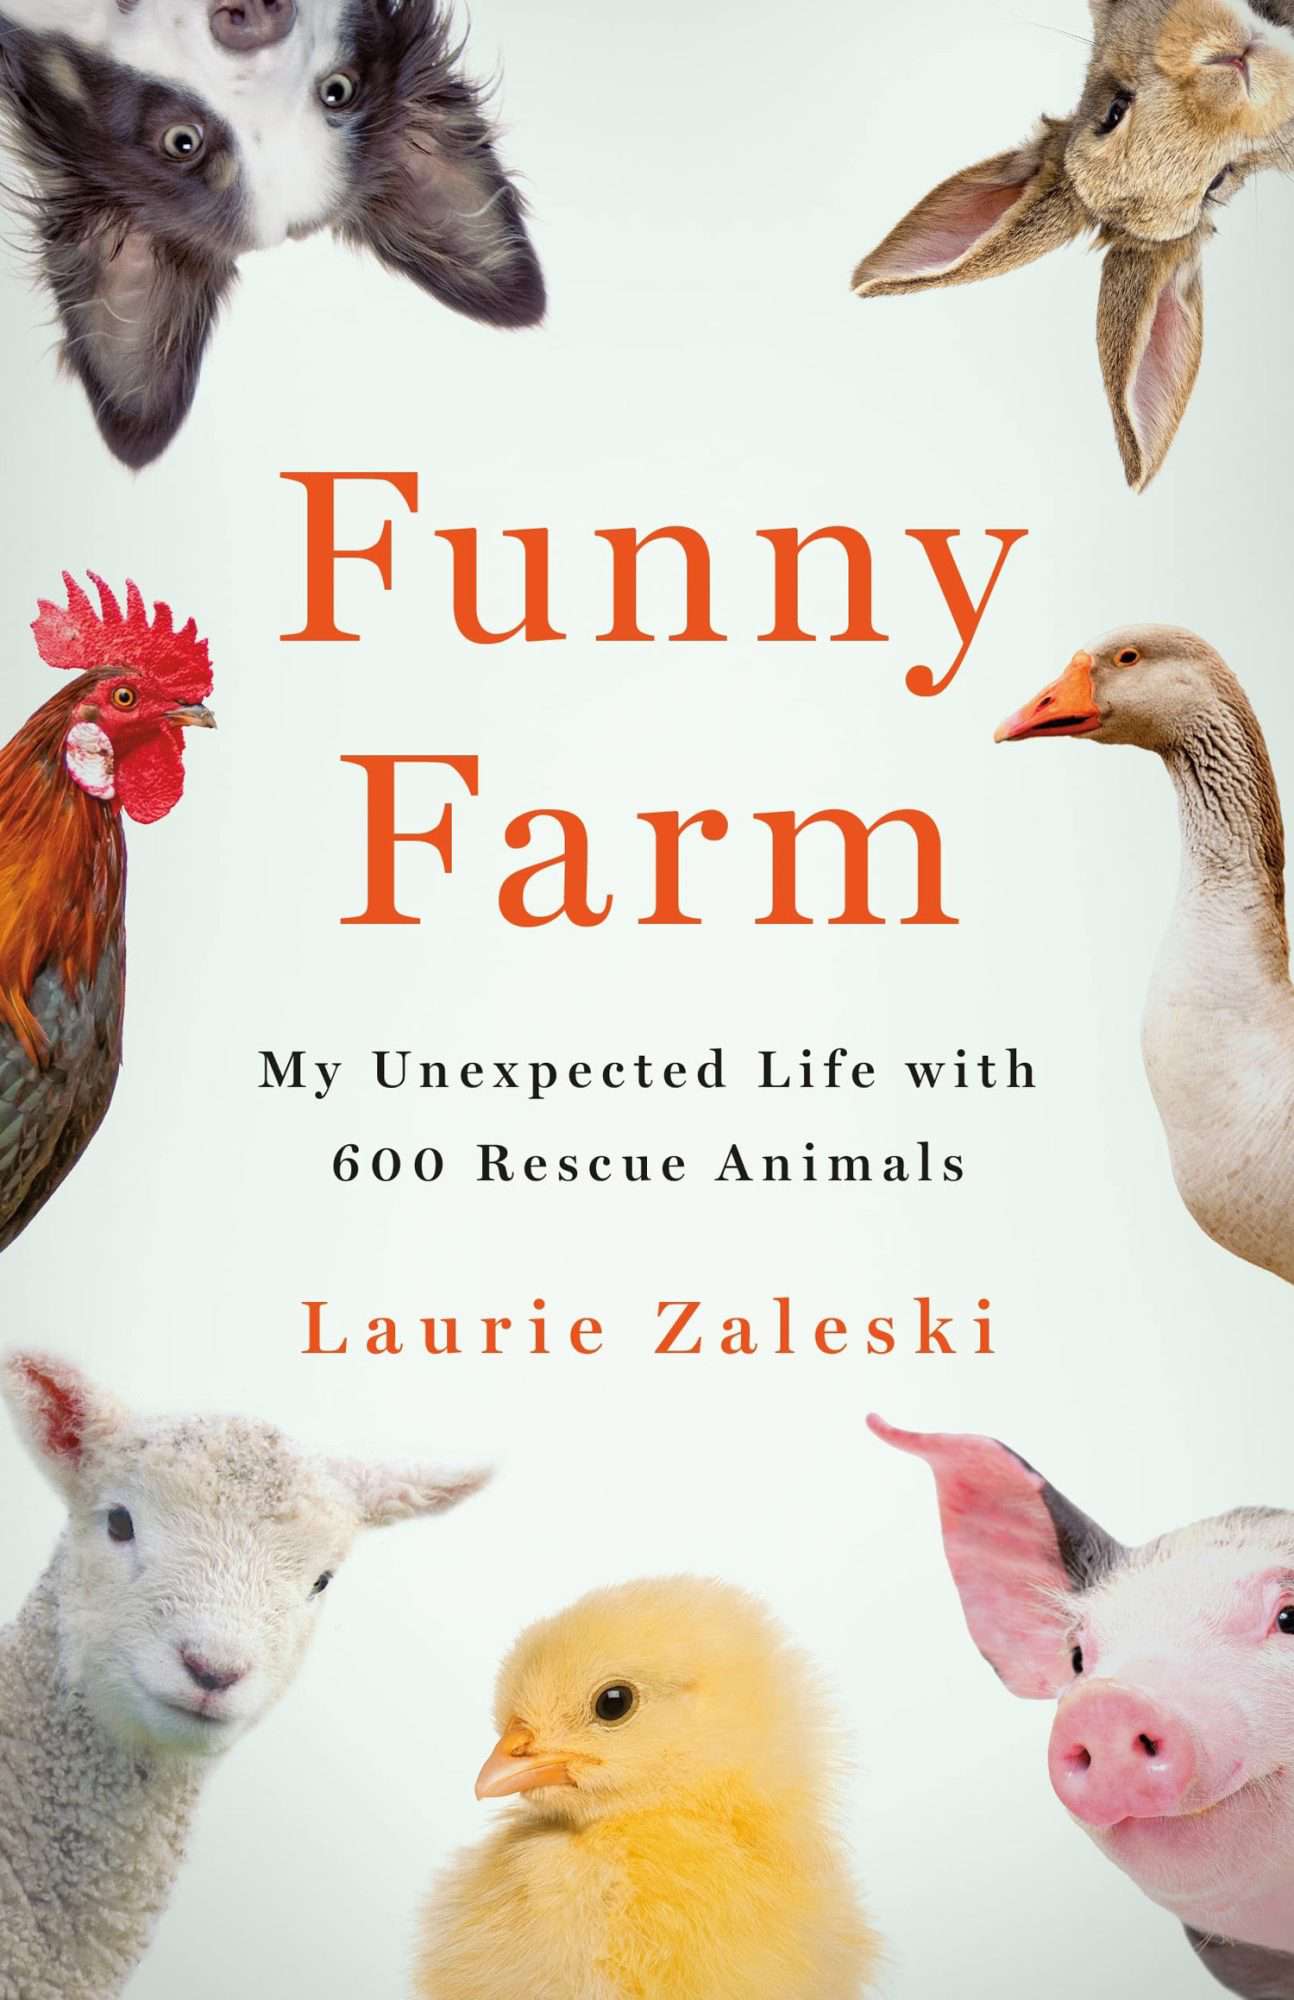 Funny Farm: My Unexpected Life with 600 Rescue Animals by Laurie Zaleski